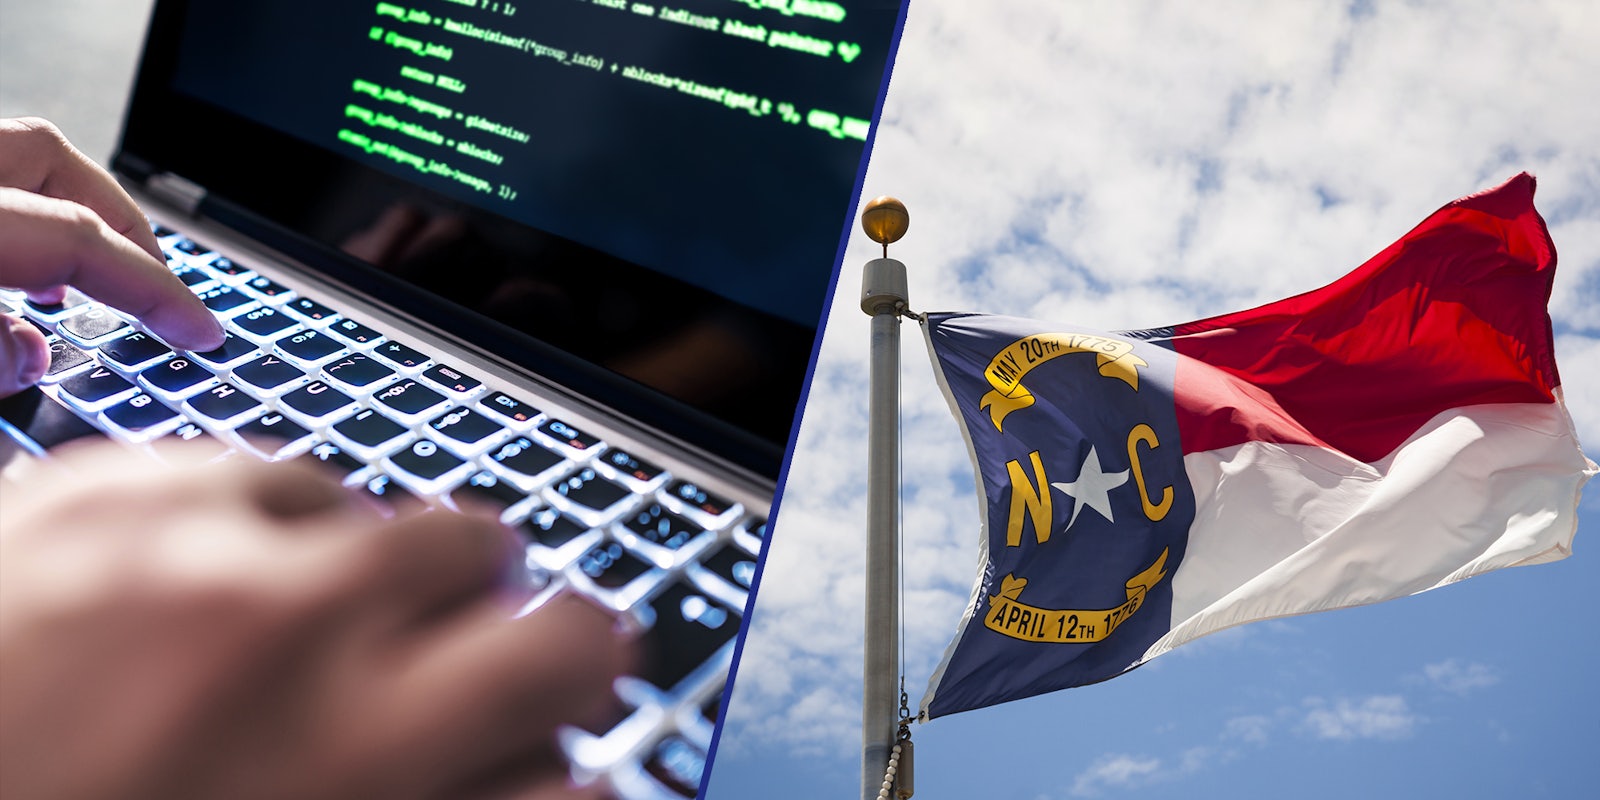 hacker using laptop (l) North Carolina flag with blue sky and clouds (r)